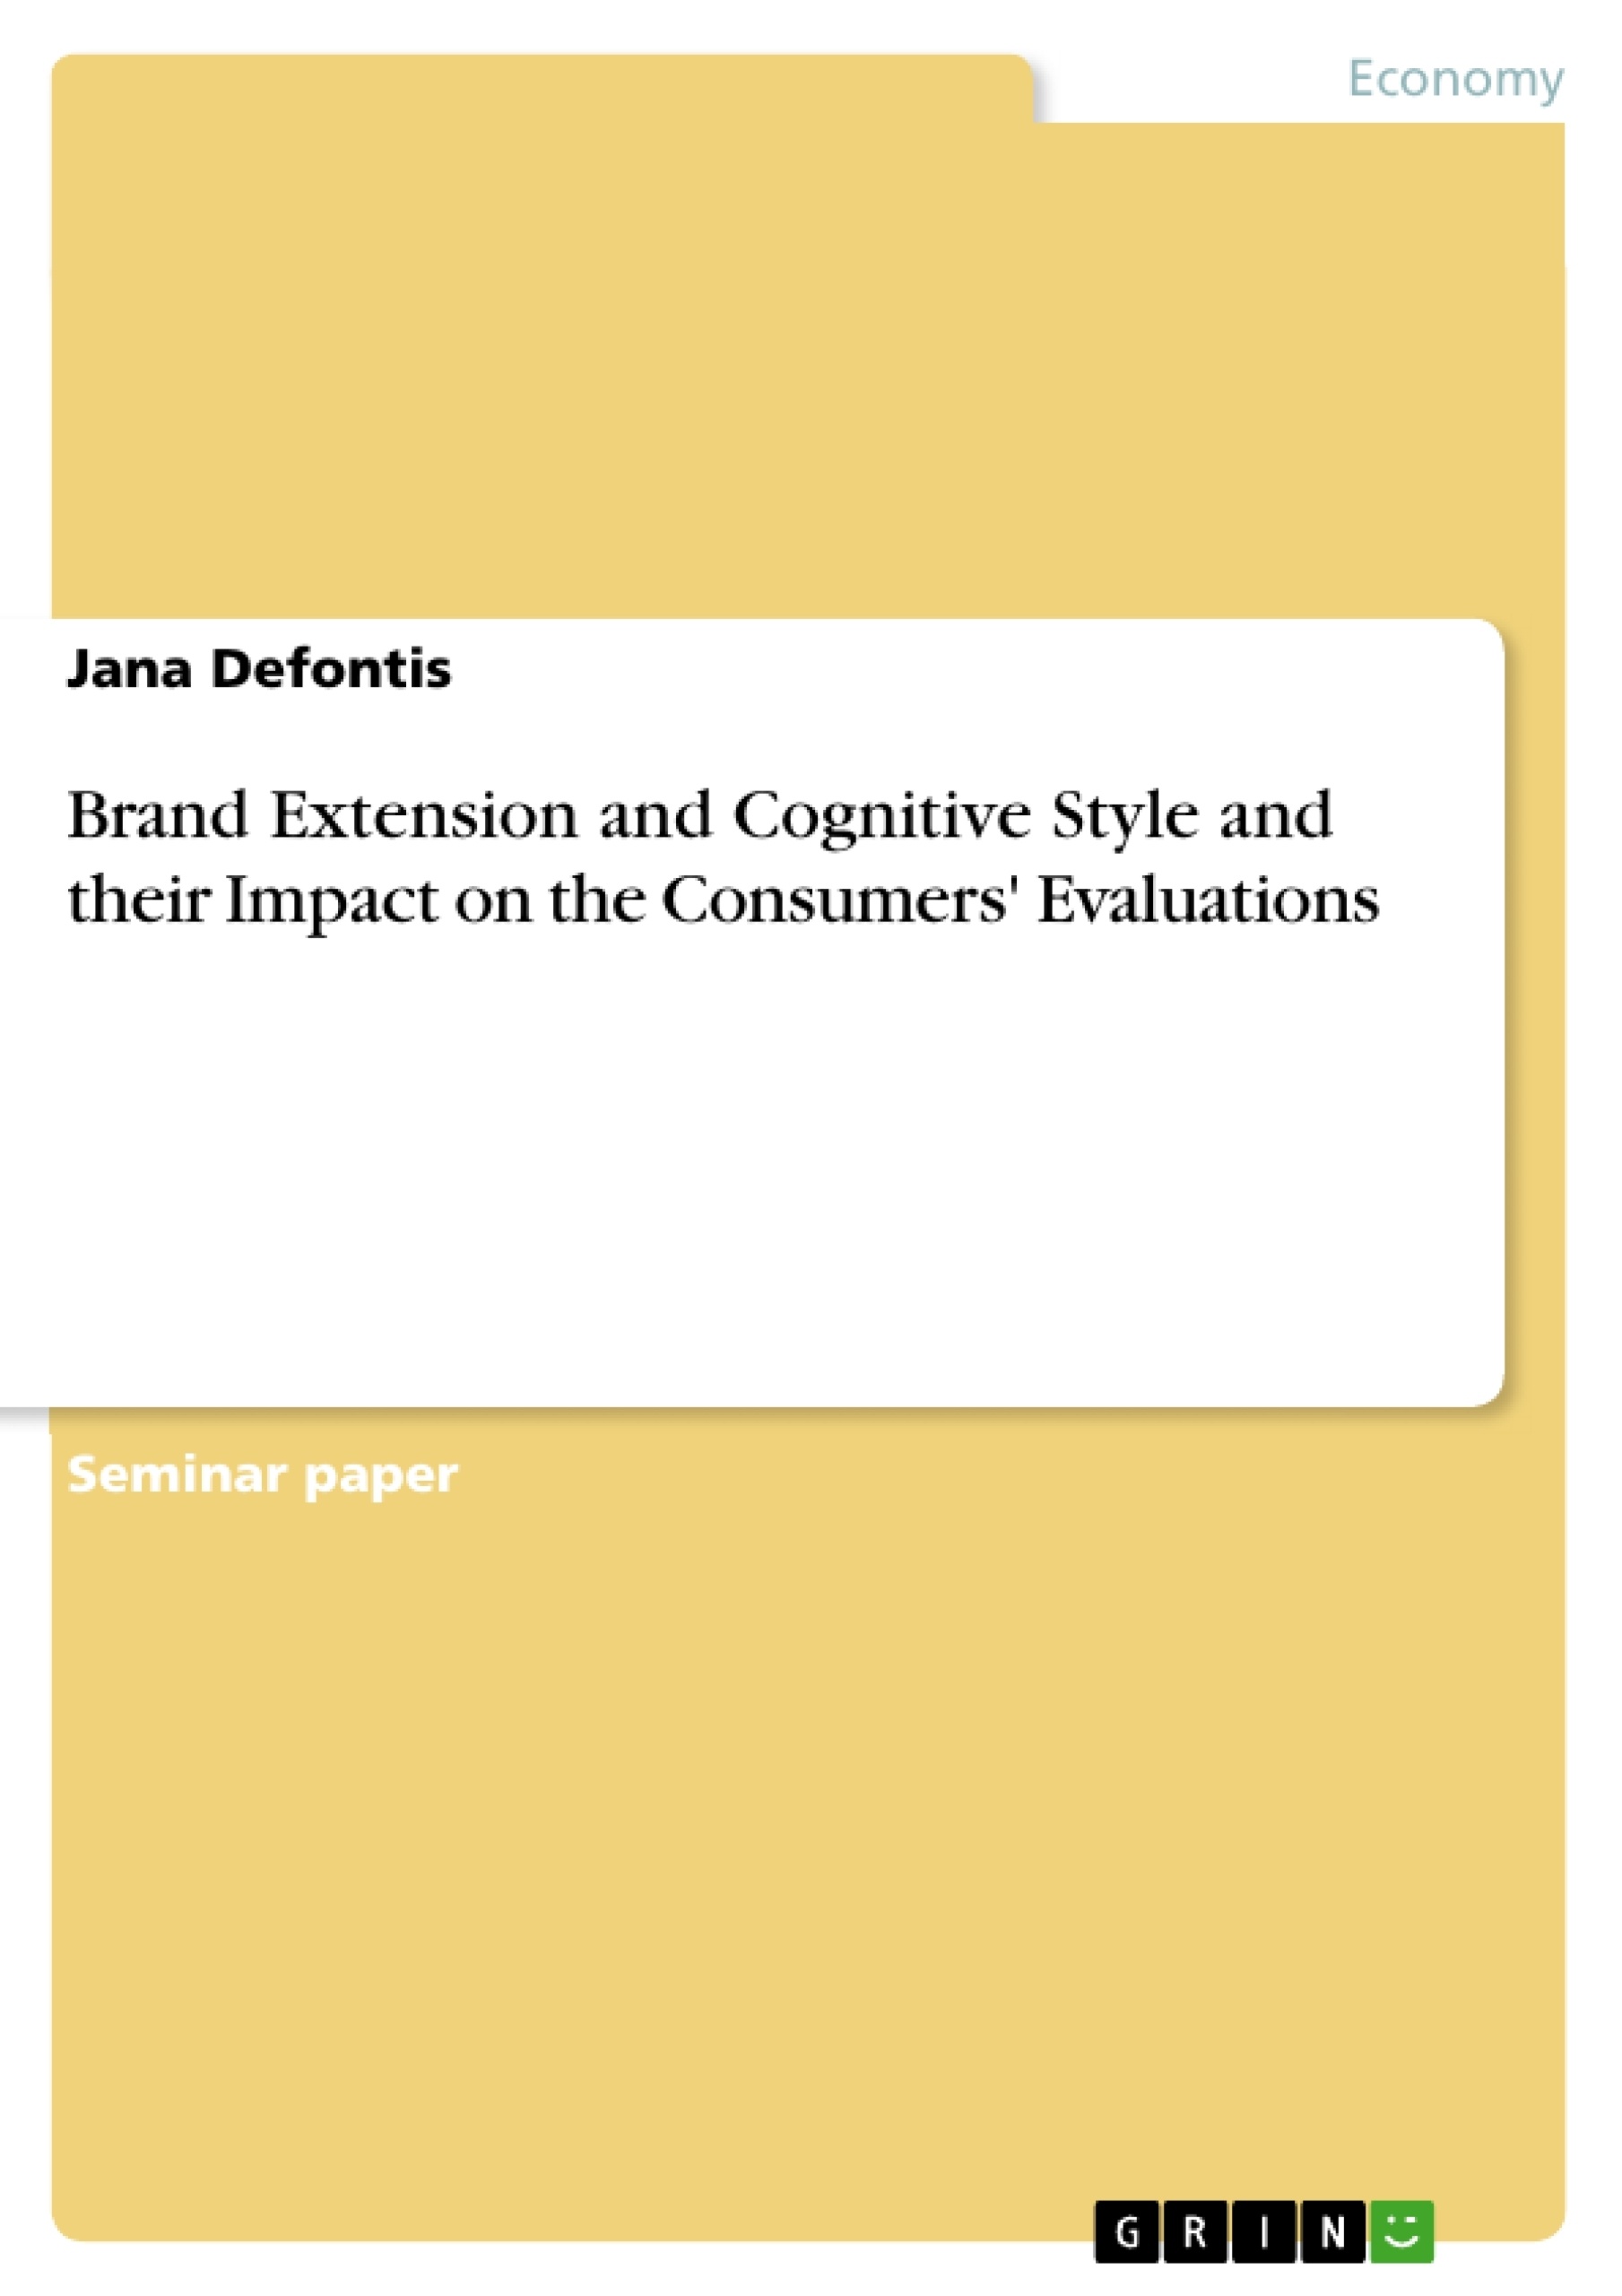 Title: Brand Extension and Cognitive Style and their Impact on the Consumers' Evaluations